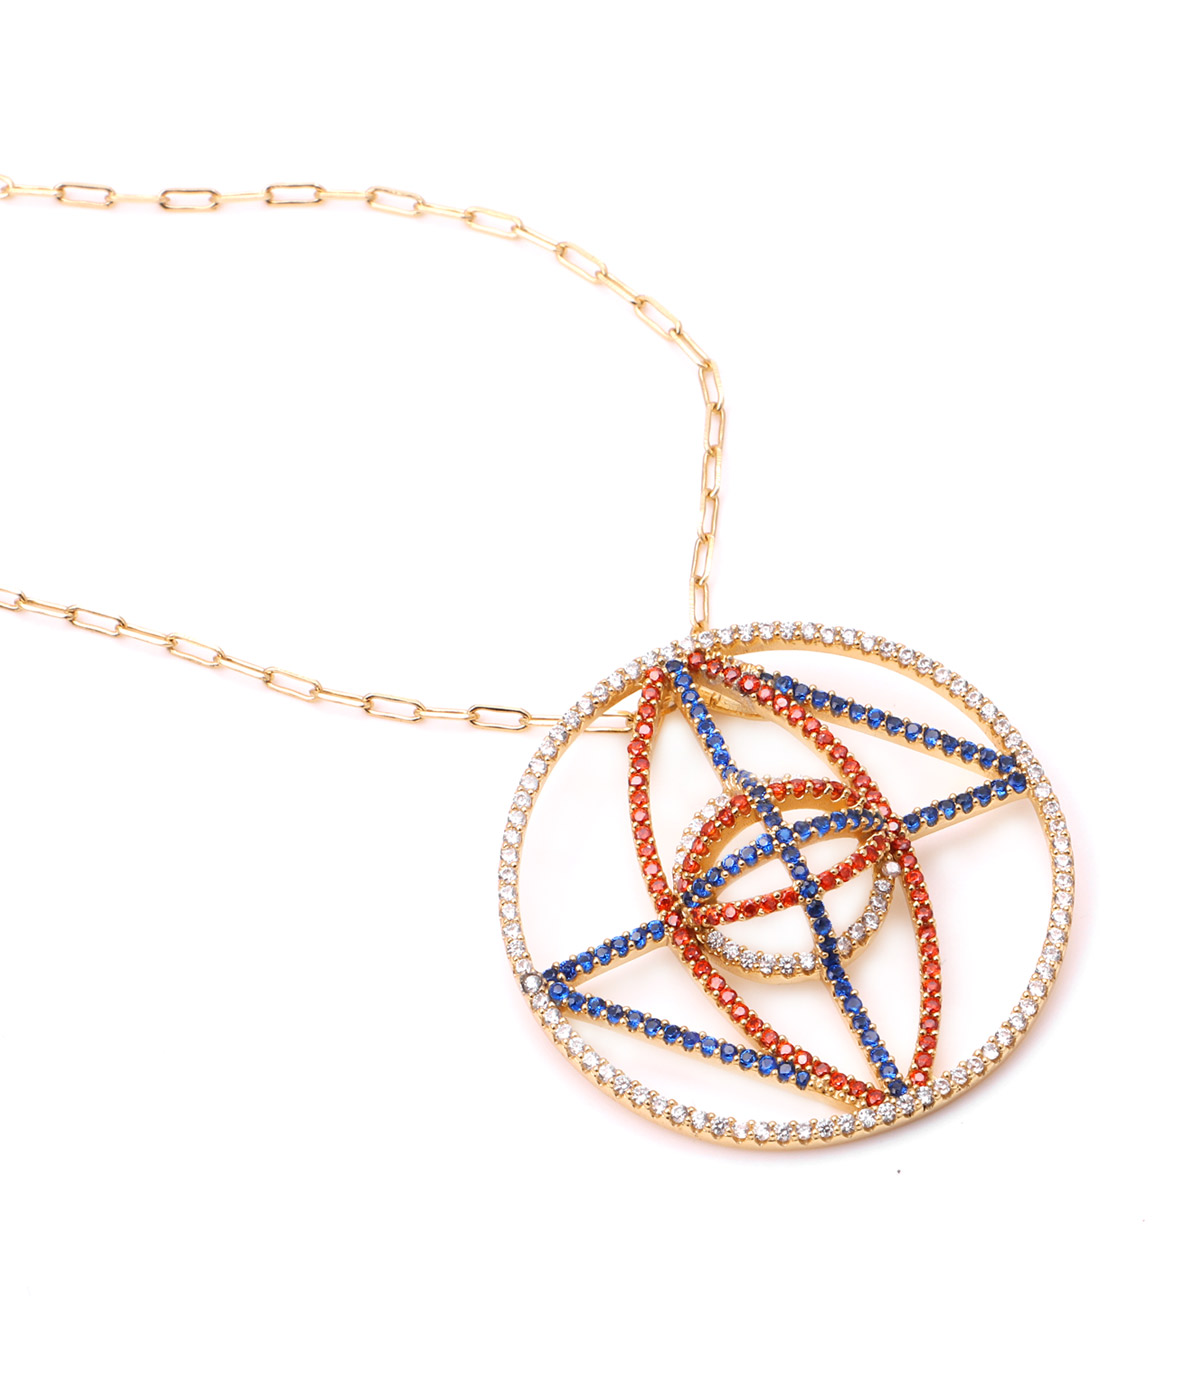 TIME & LIFE Collection - Sophia Necklace